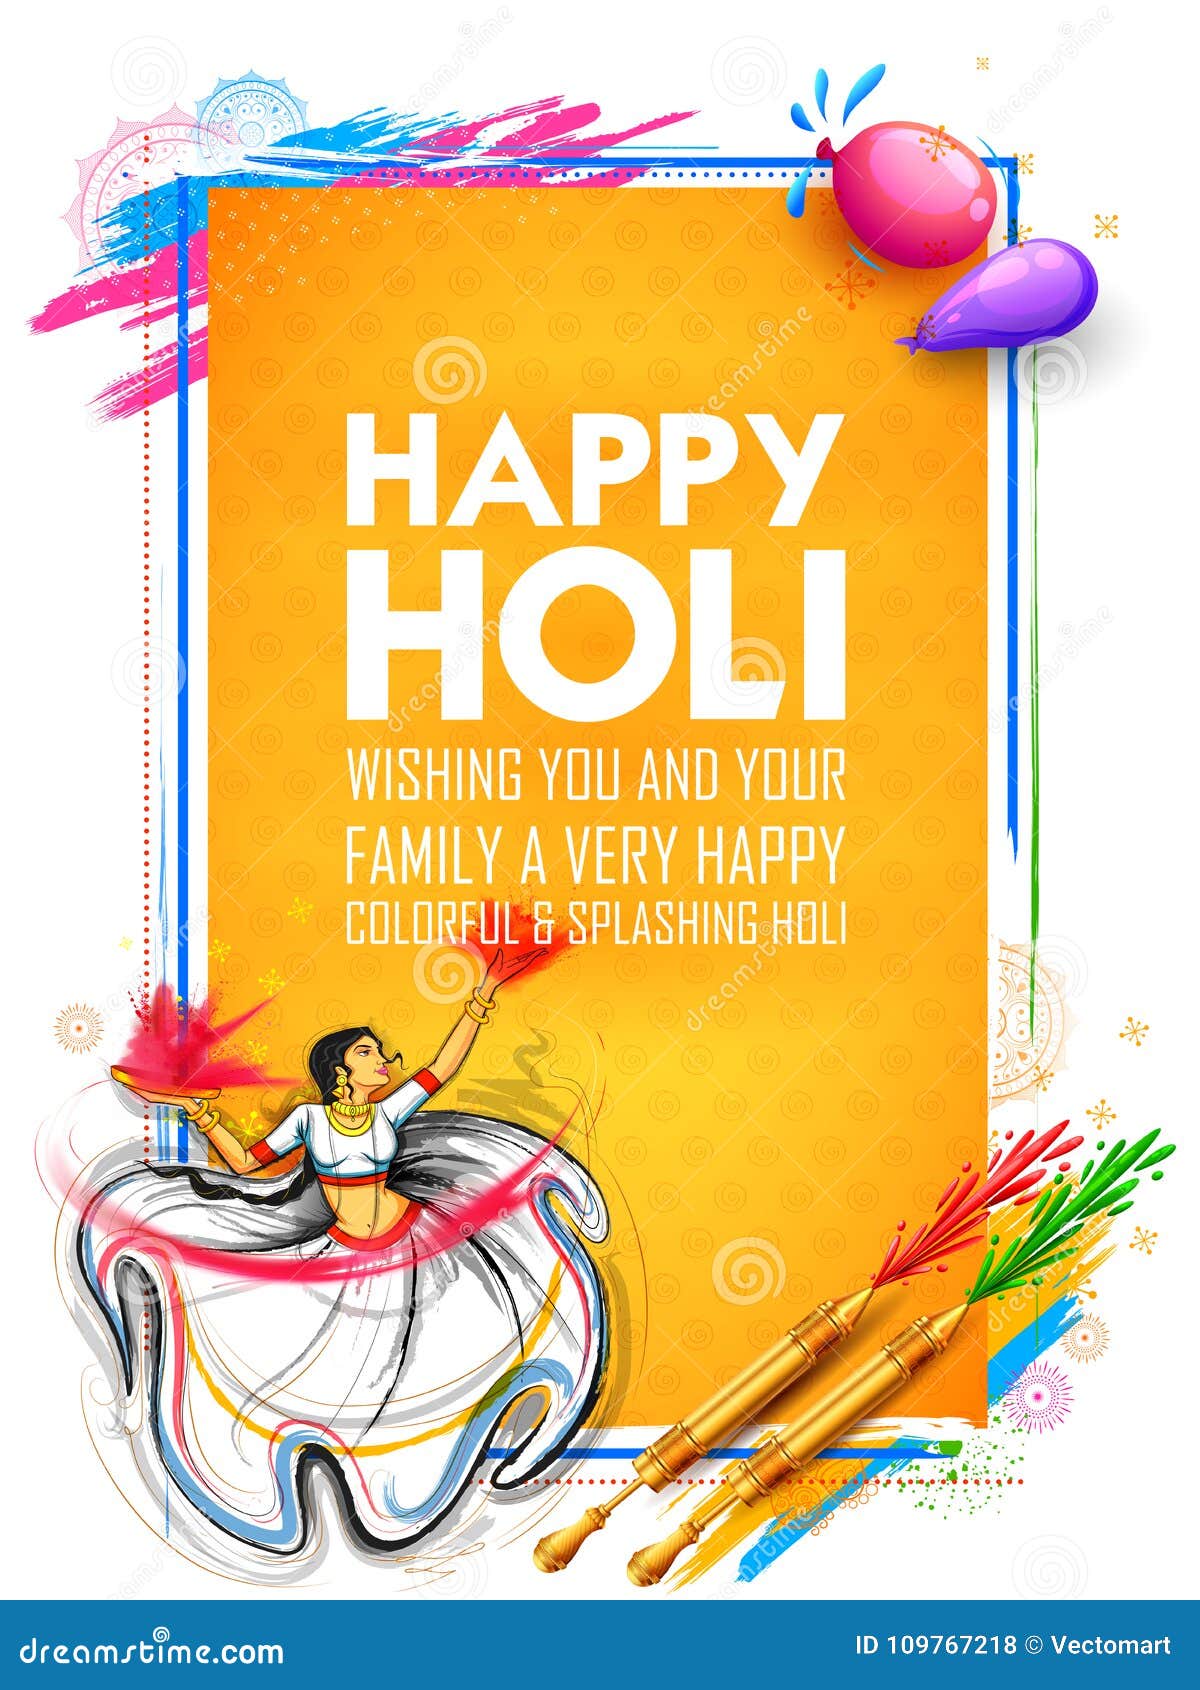 Happy Holi Background for Festival of Colors Celebration Greetings ...